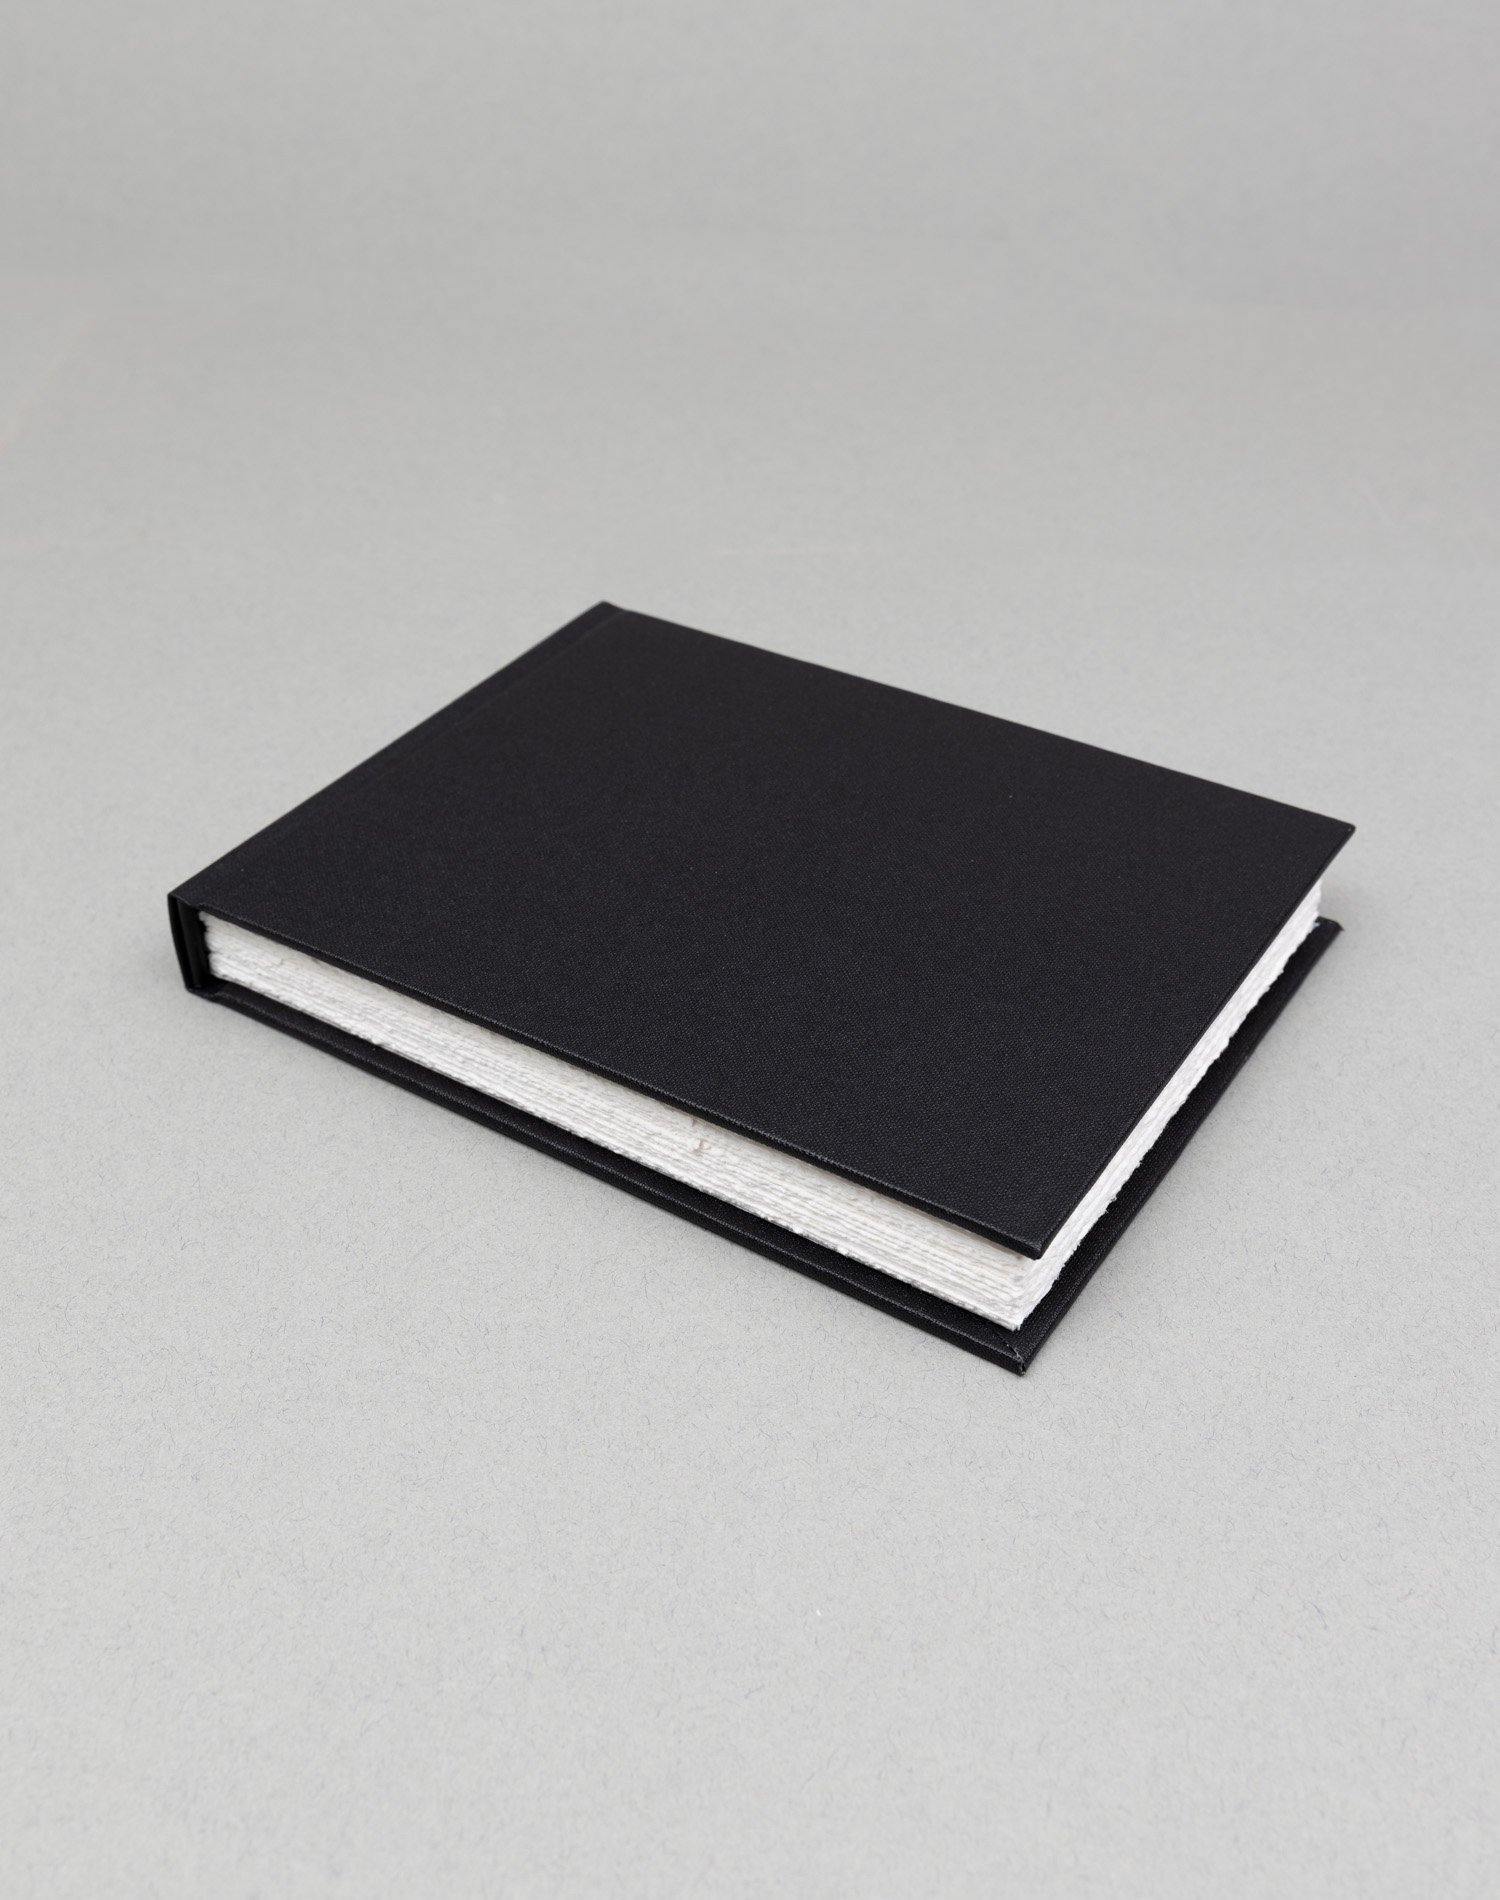 Fabriano Accademia Sketchbook 120gsm - Crafty Arts